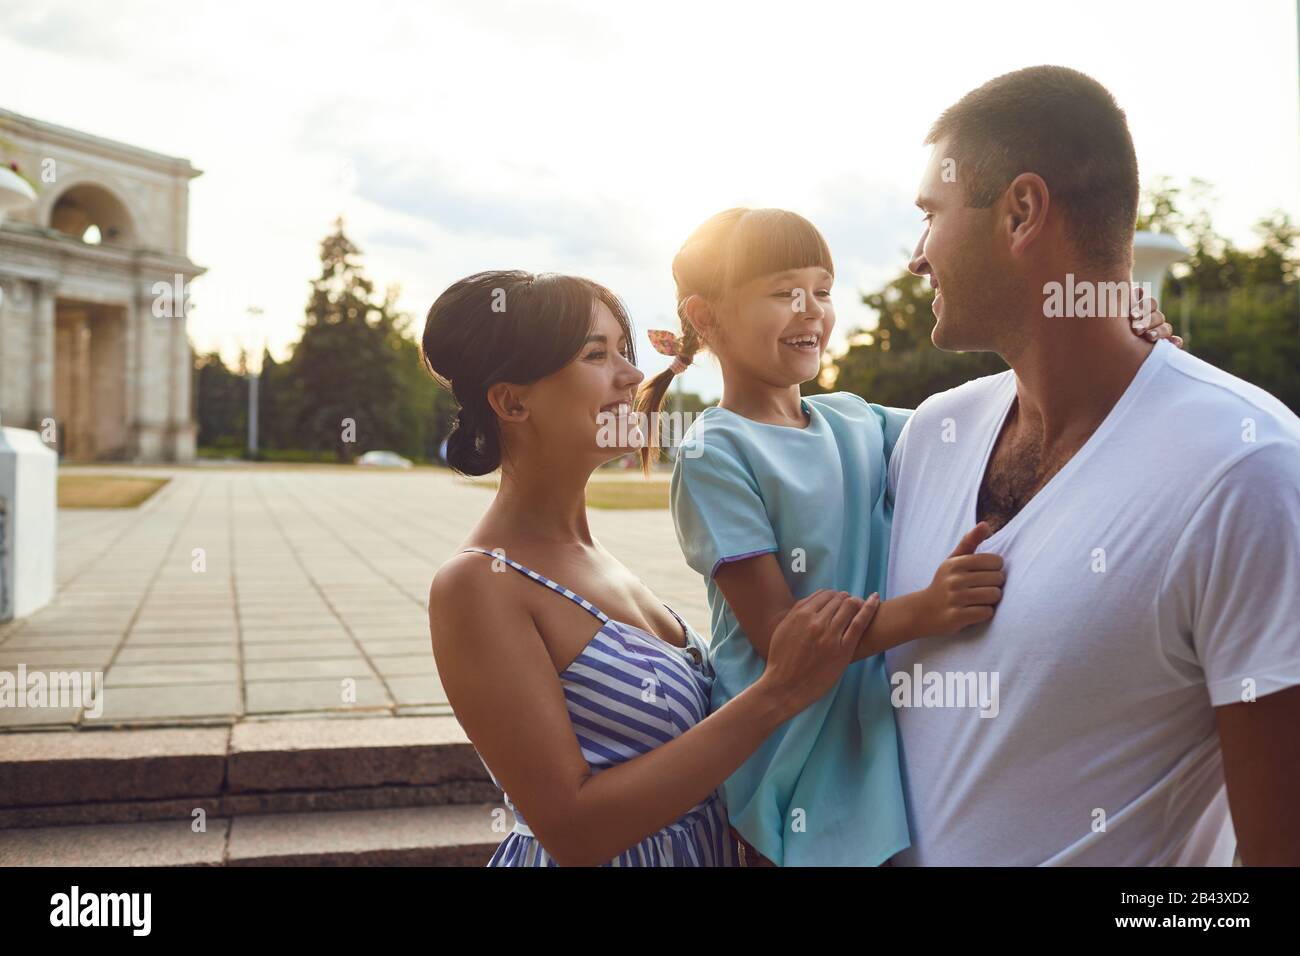 Happy smiling family hugging on the street. Stock Photo